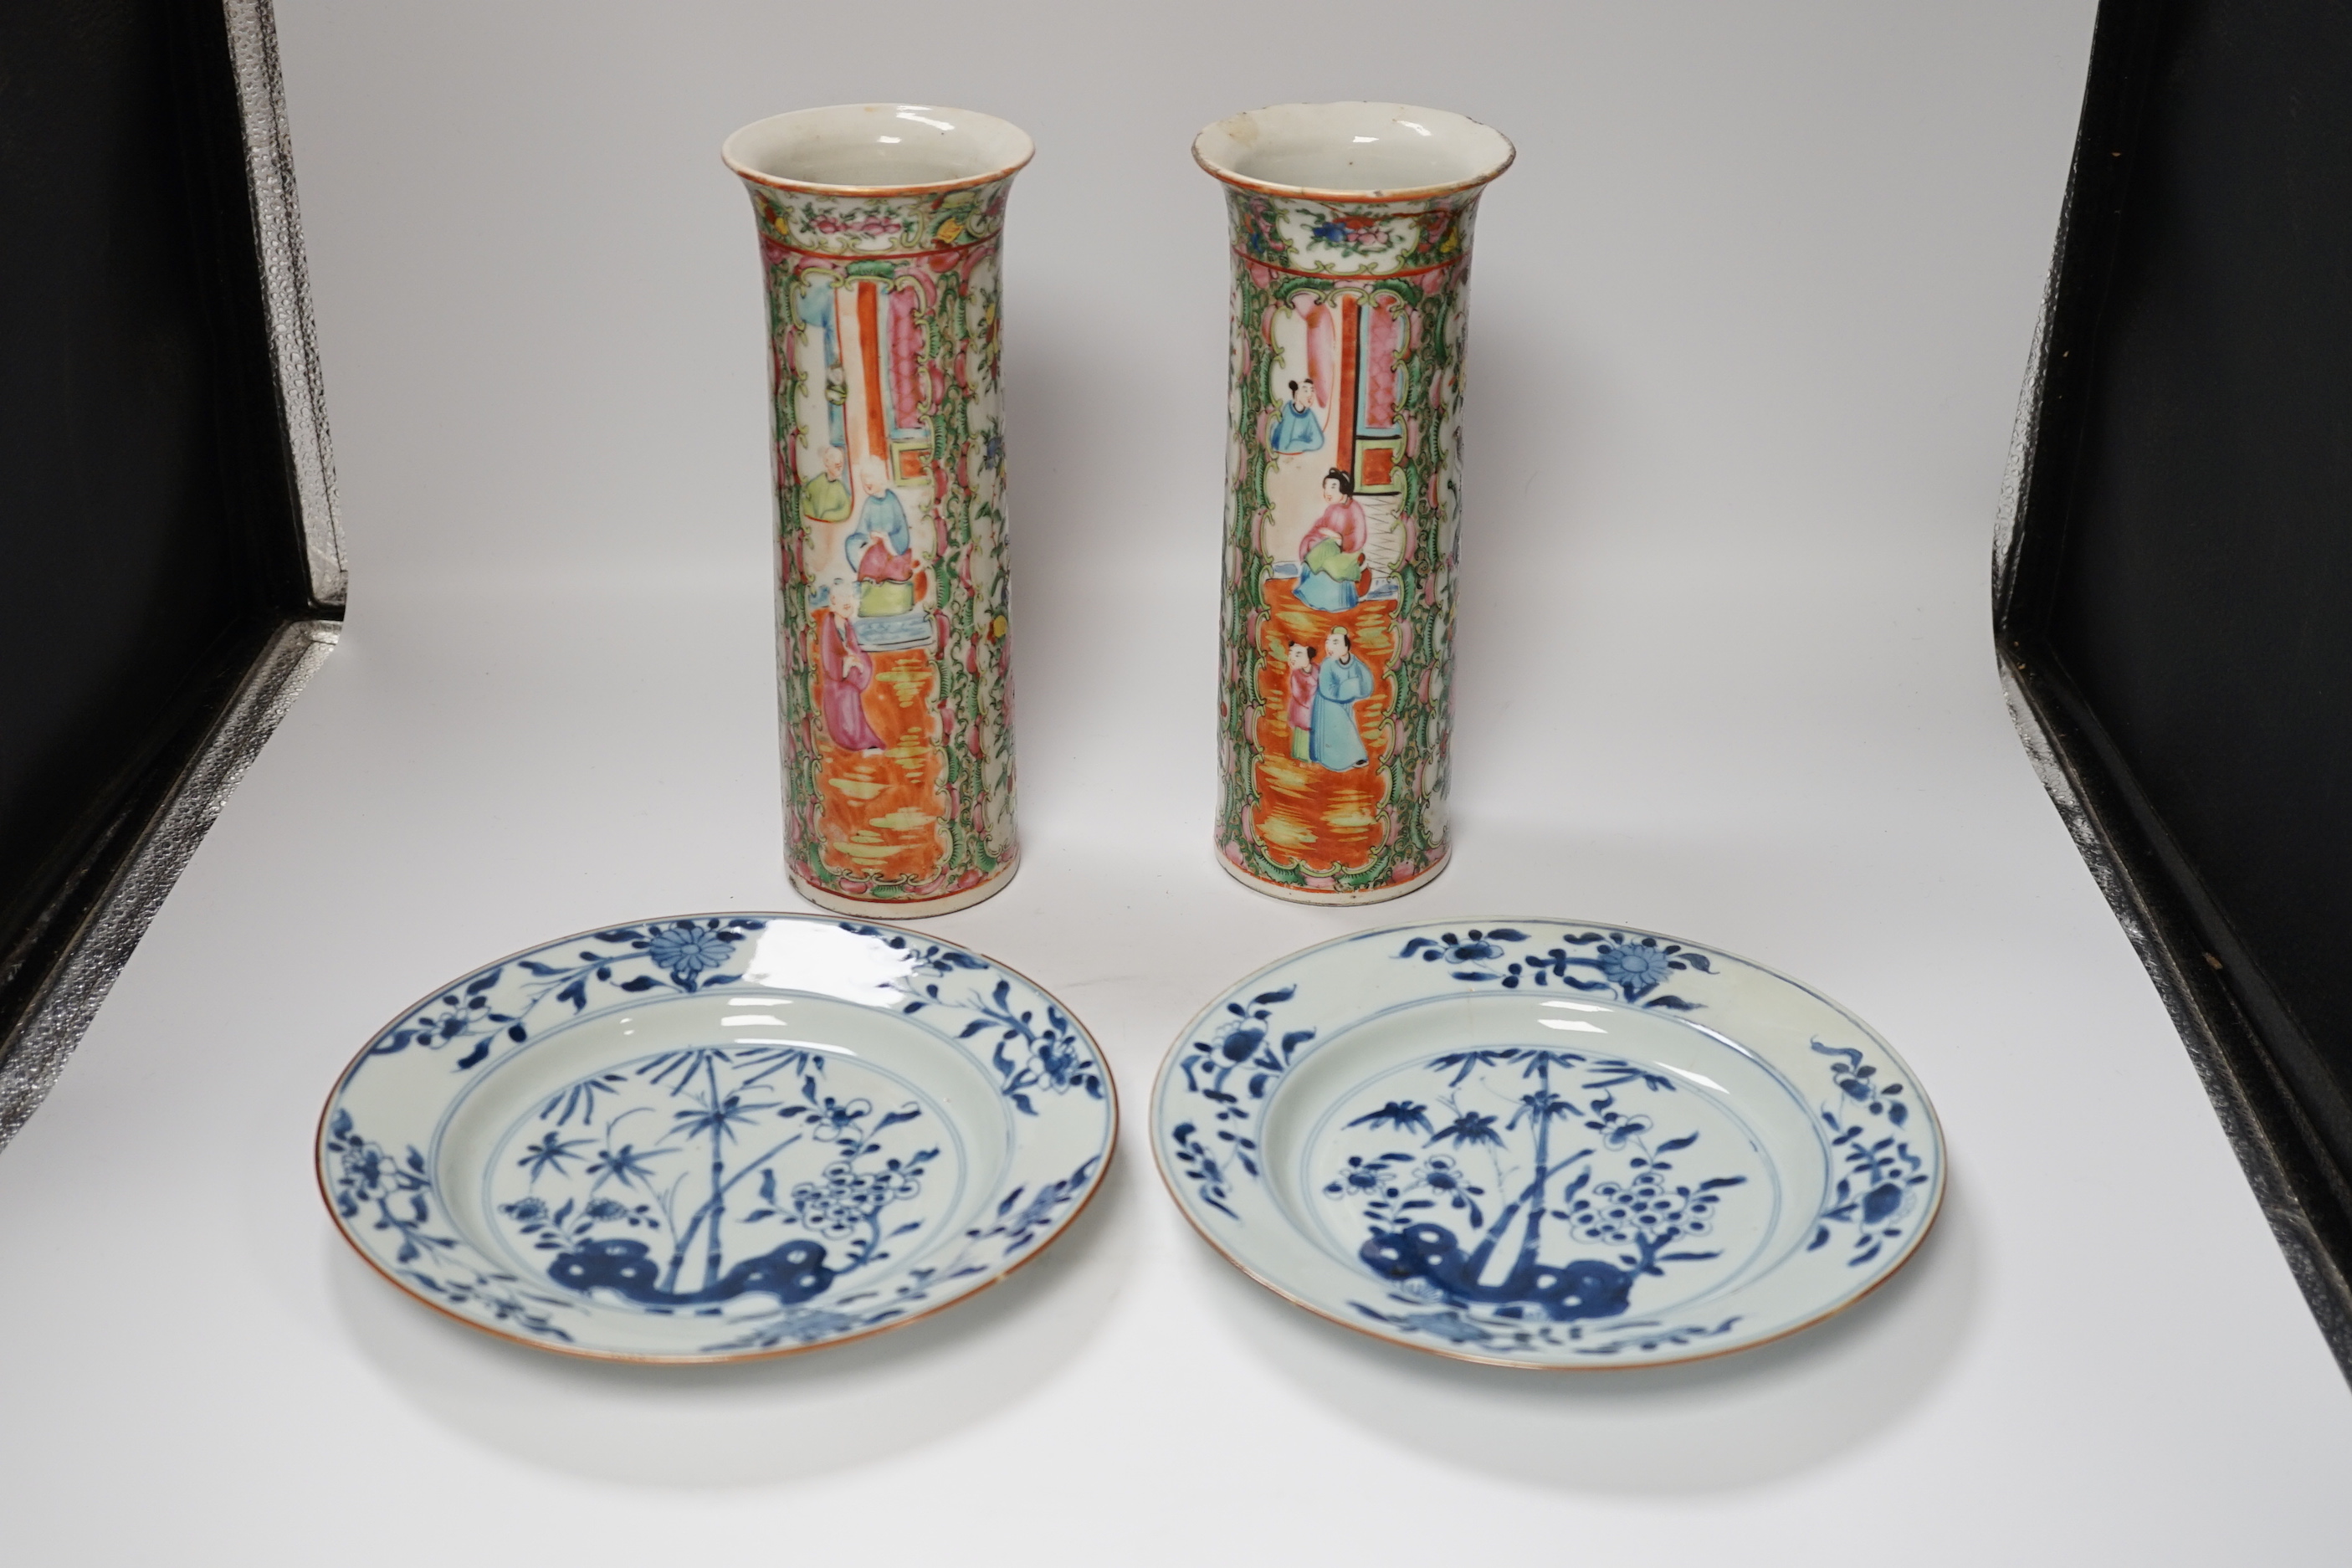 A pair of 19th century Chinese famille rose sleeve vases and a pair of 18th century Chinese blue and white plates, vases 26.5cm